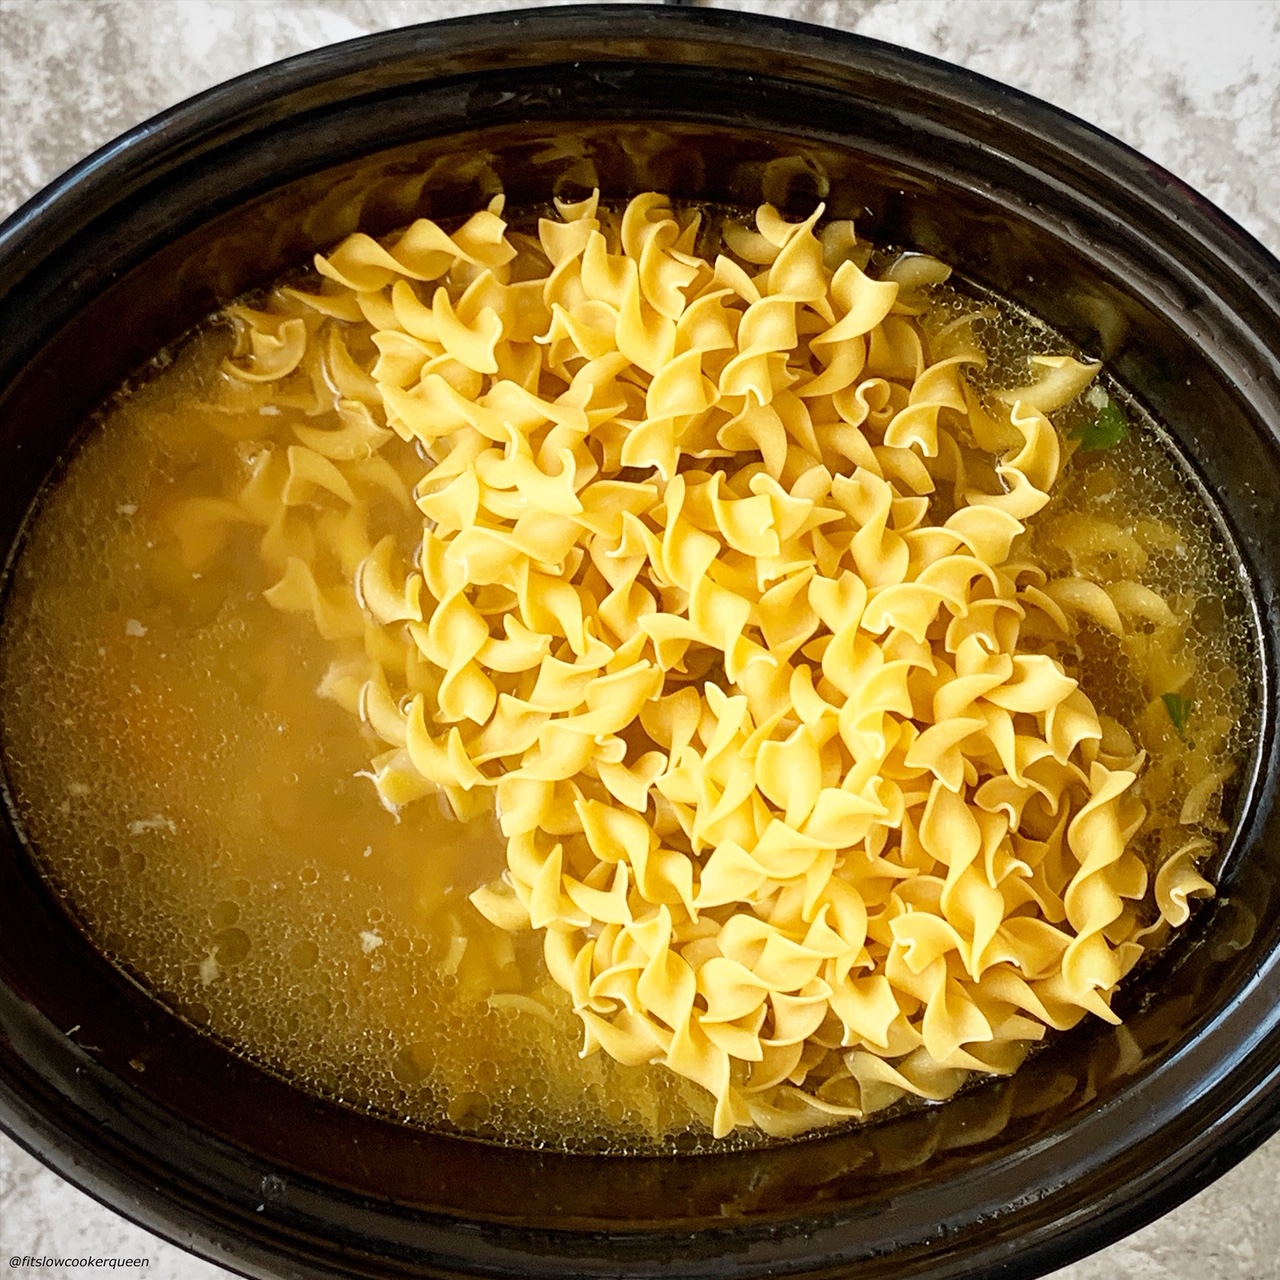 add uncooked noodles to the slow cooker for chicken noodle soup